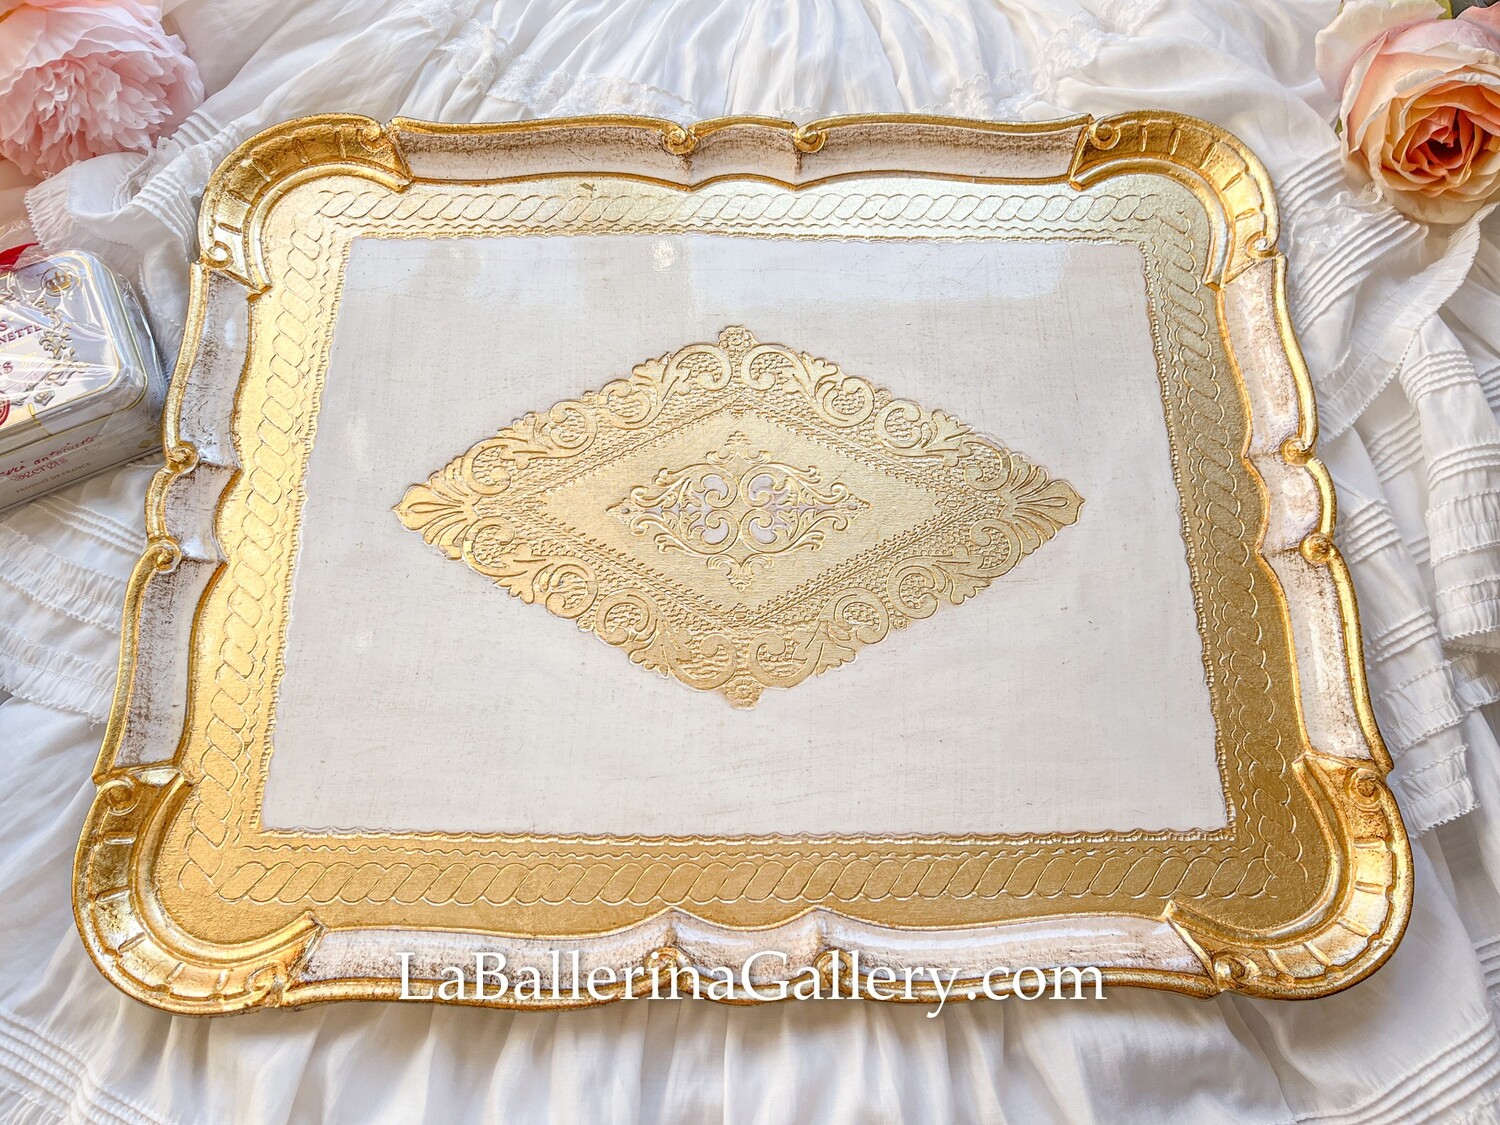 Florentine tray large white gold rectangle shabby chic baroque rococo wooden decorative tray tea board